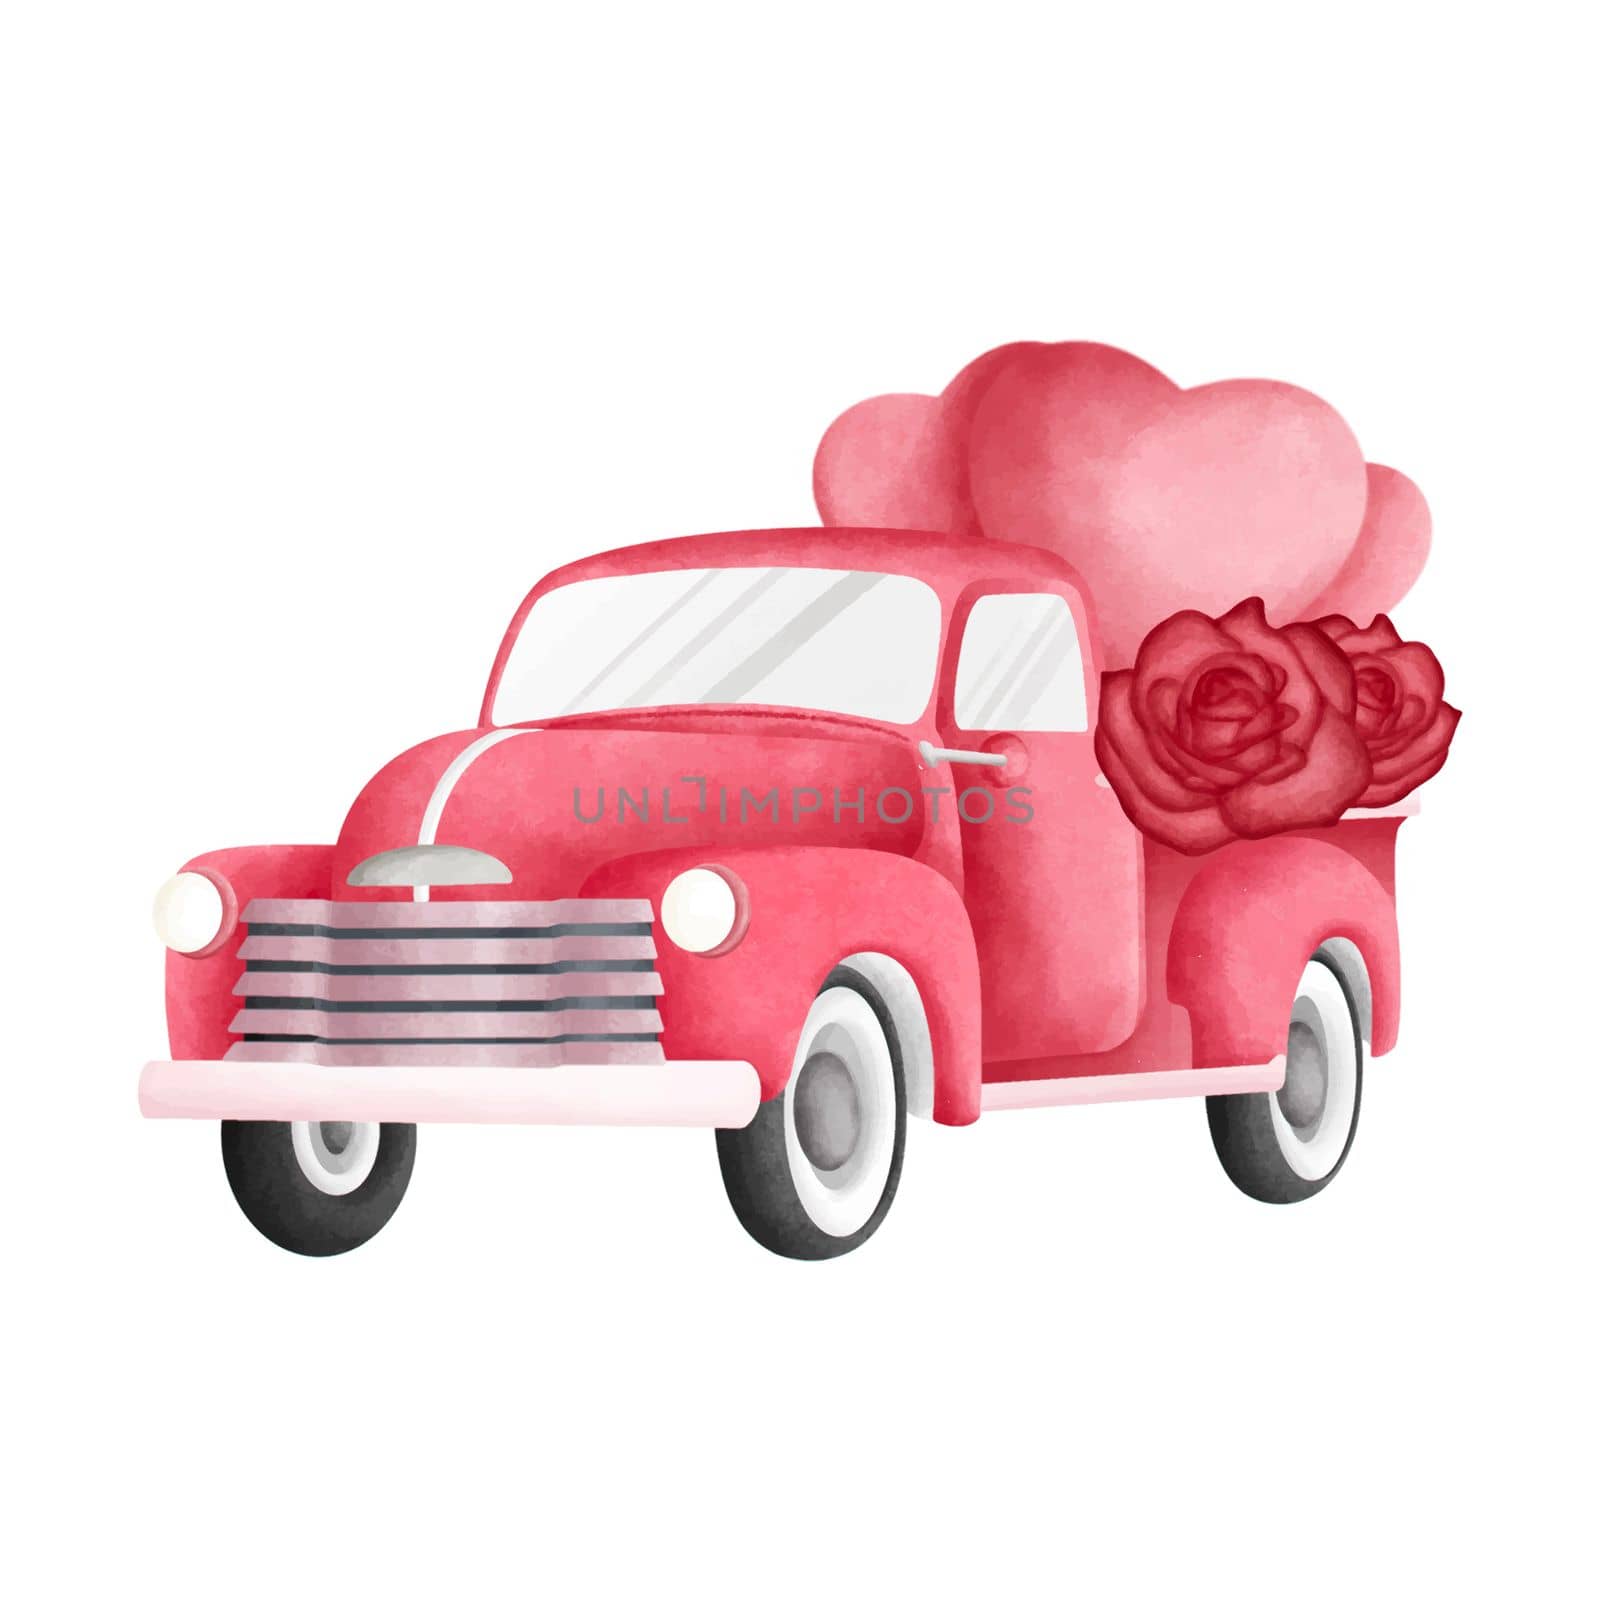 Red Love Truck  Cute Romantic Watercolor Clipart PNG. Paris In Love collection with lovely red truck with hearts and roses for romantic design element, love art, wedding watercolor illustration.